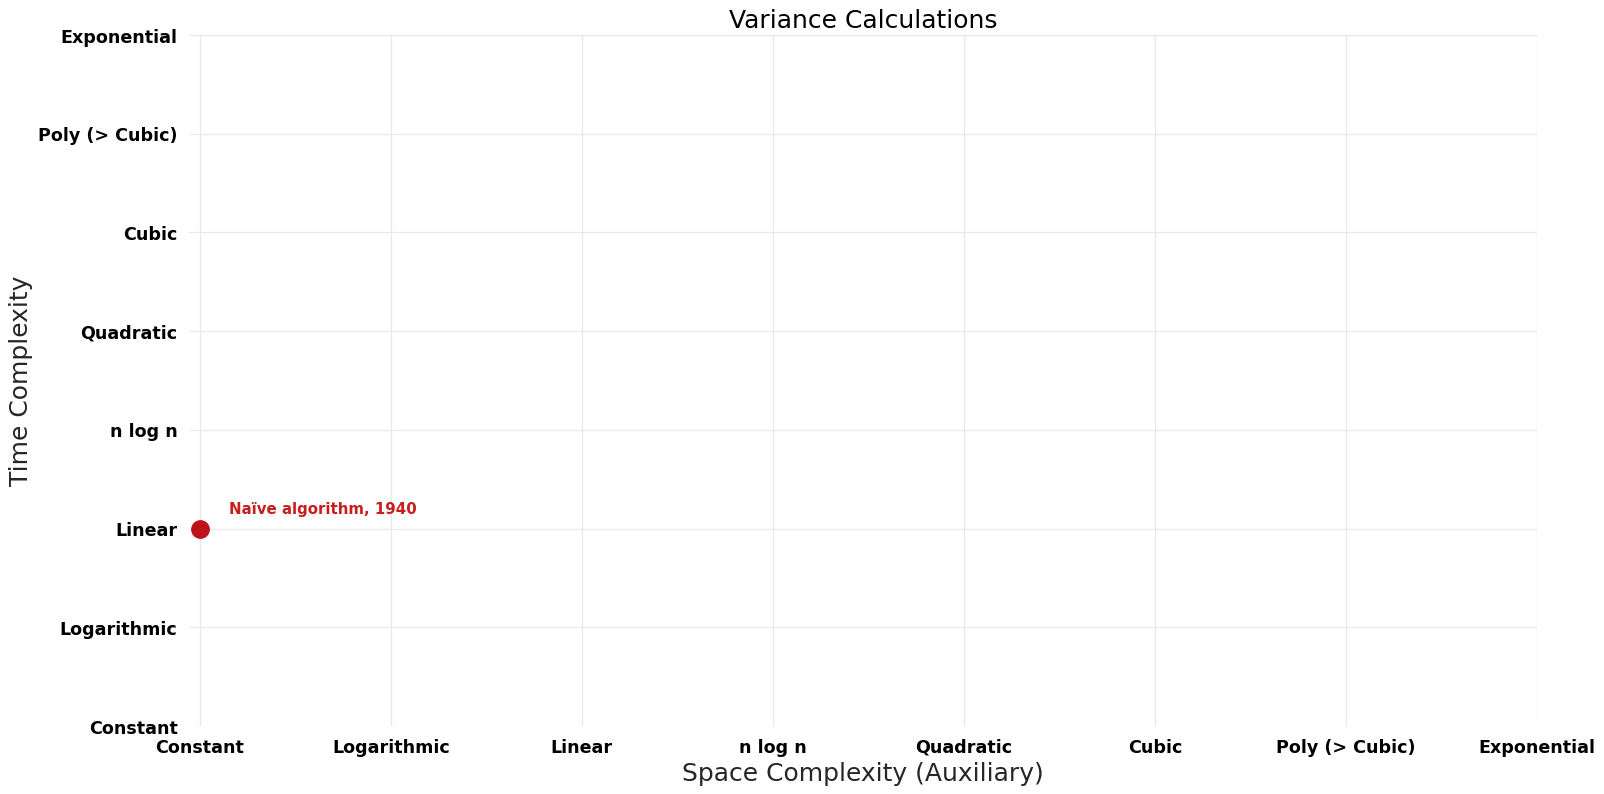 Variance Calculations - Pareto Frontier.png